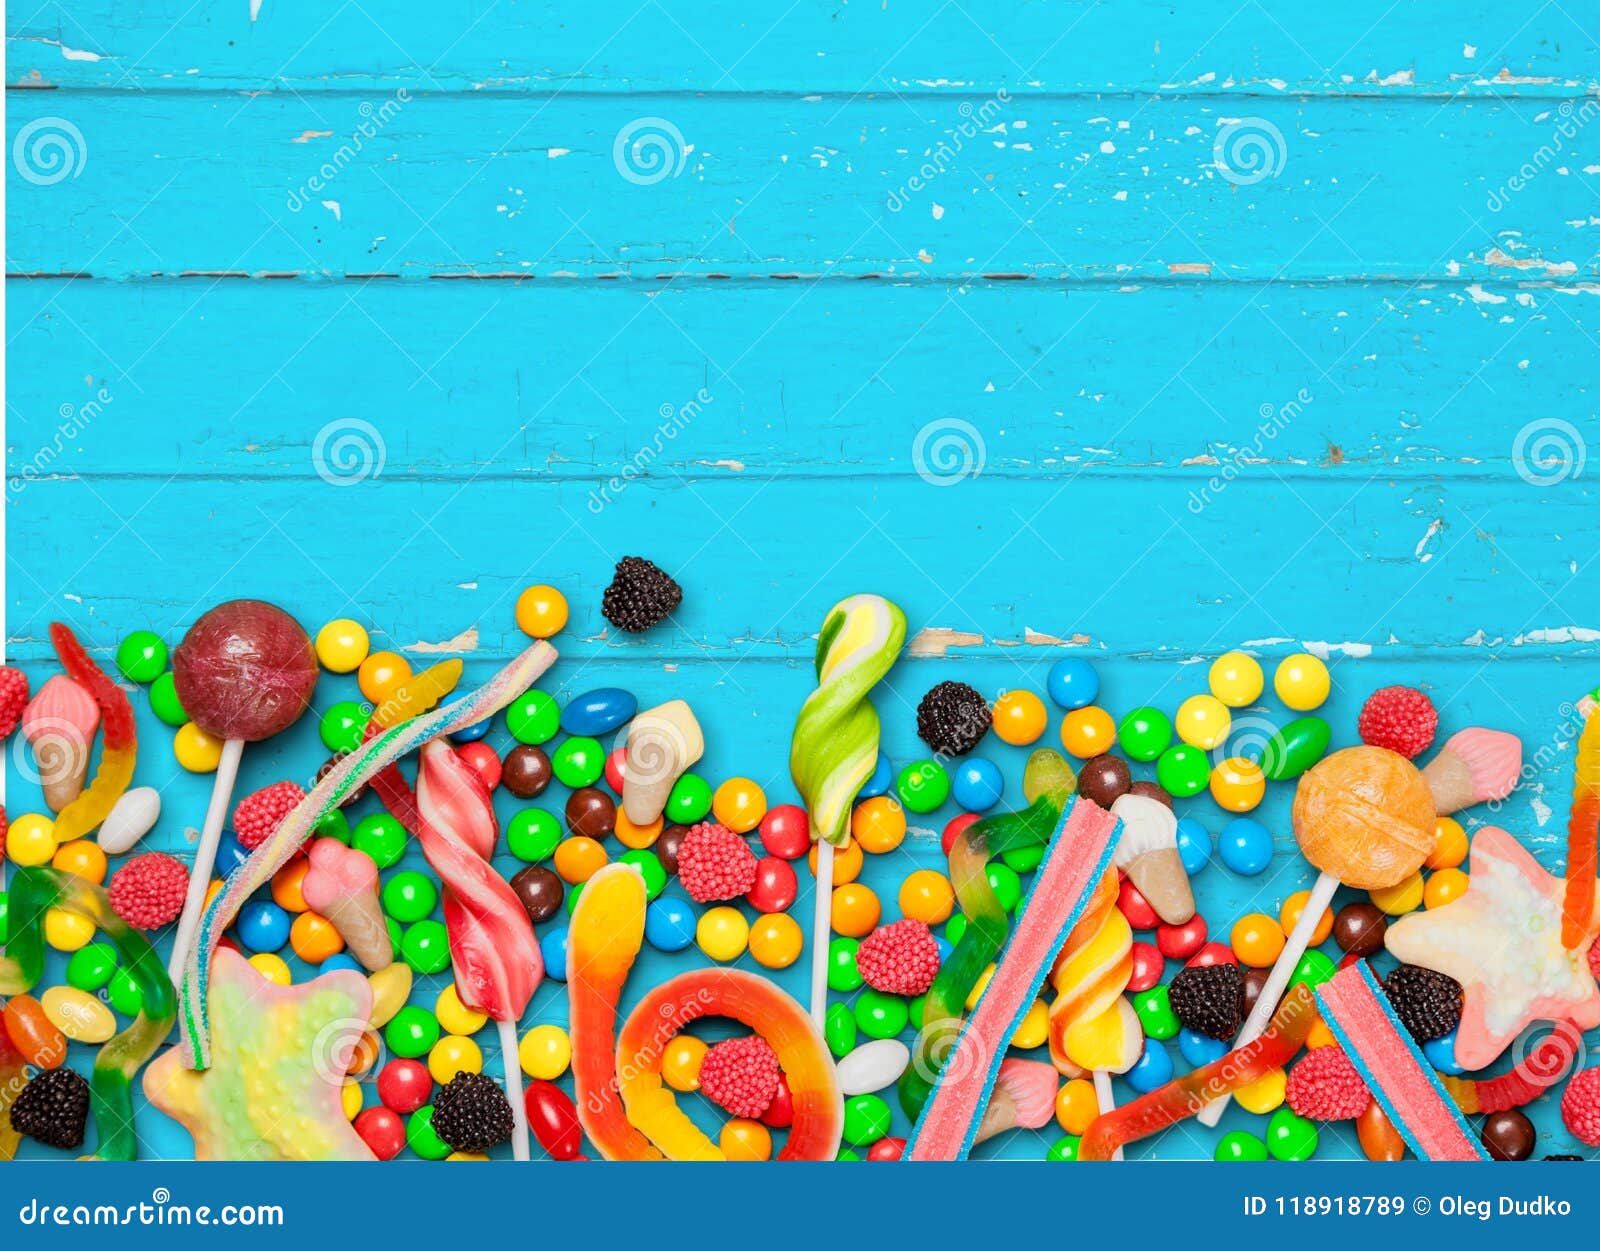 Multi color candy on desk stock image. Image of holiday - 118918789